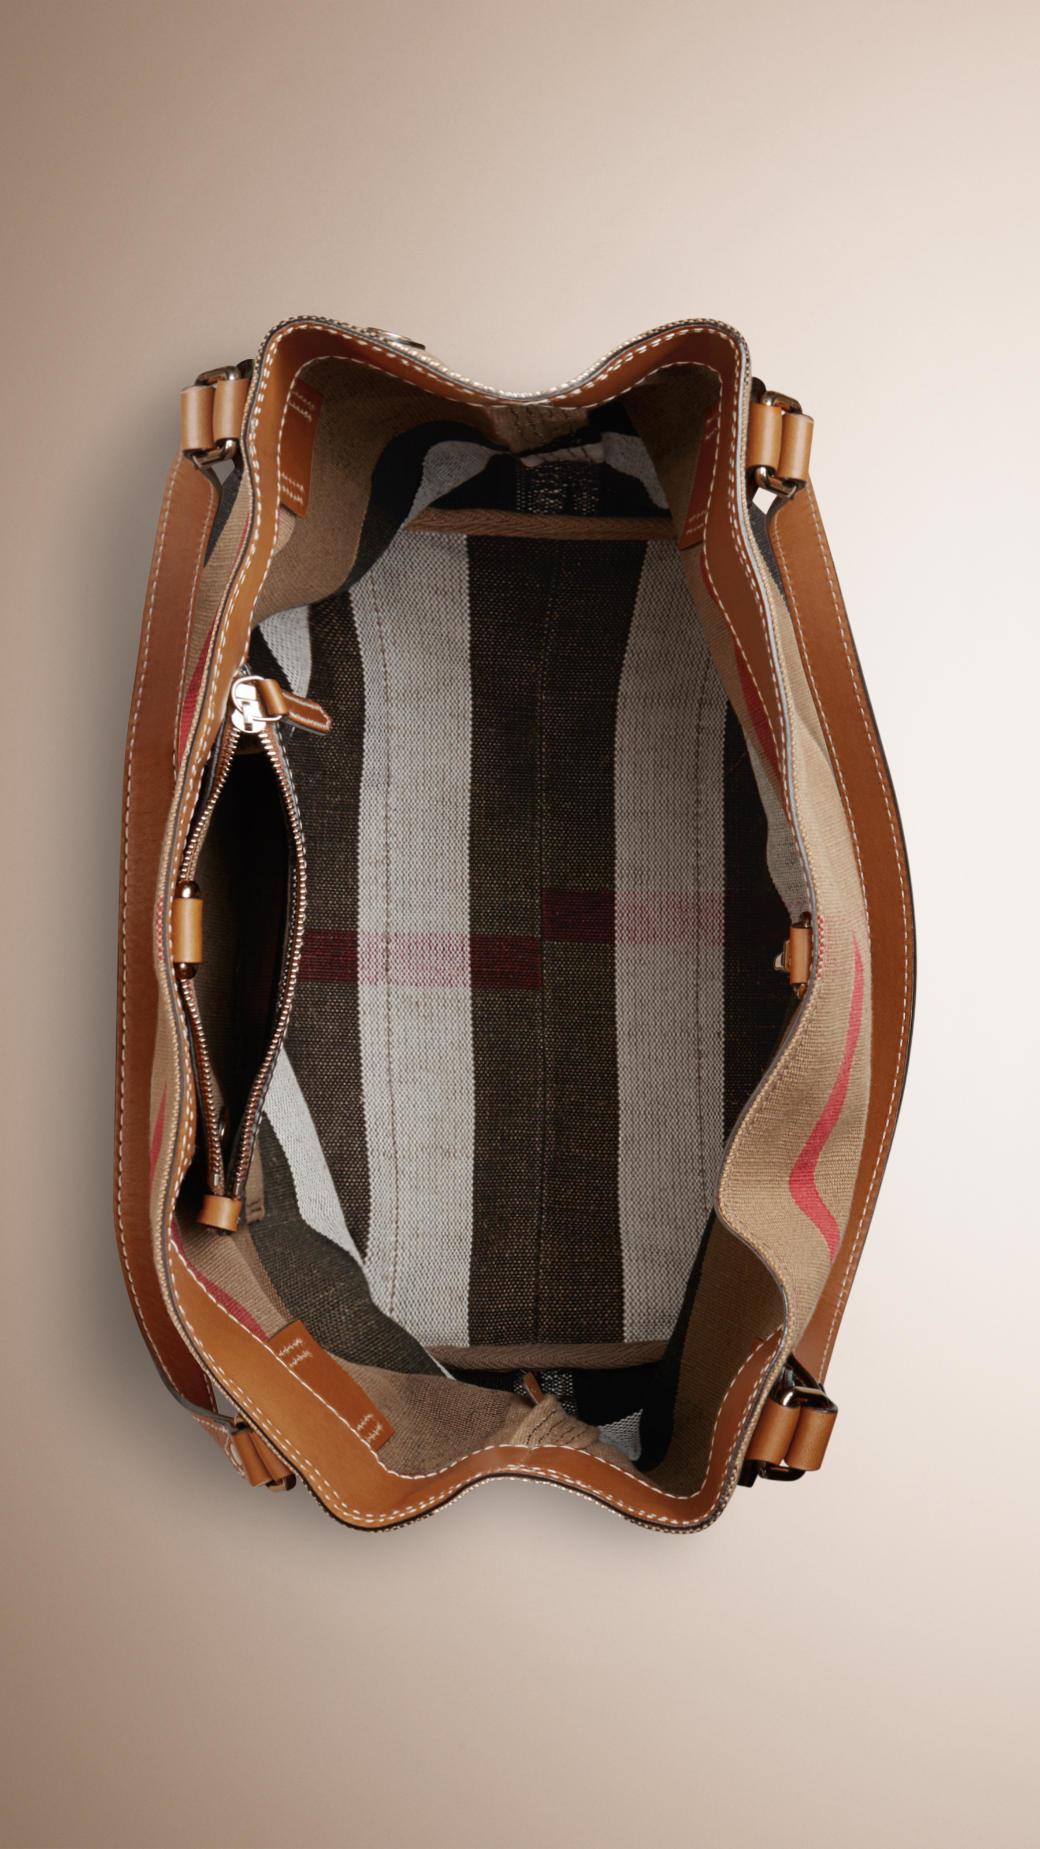 Burberry Medium Canvas Check Tote Bag in Brown (saddle brown) | Lyst